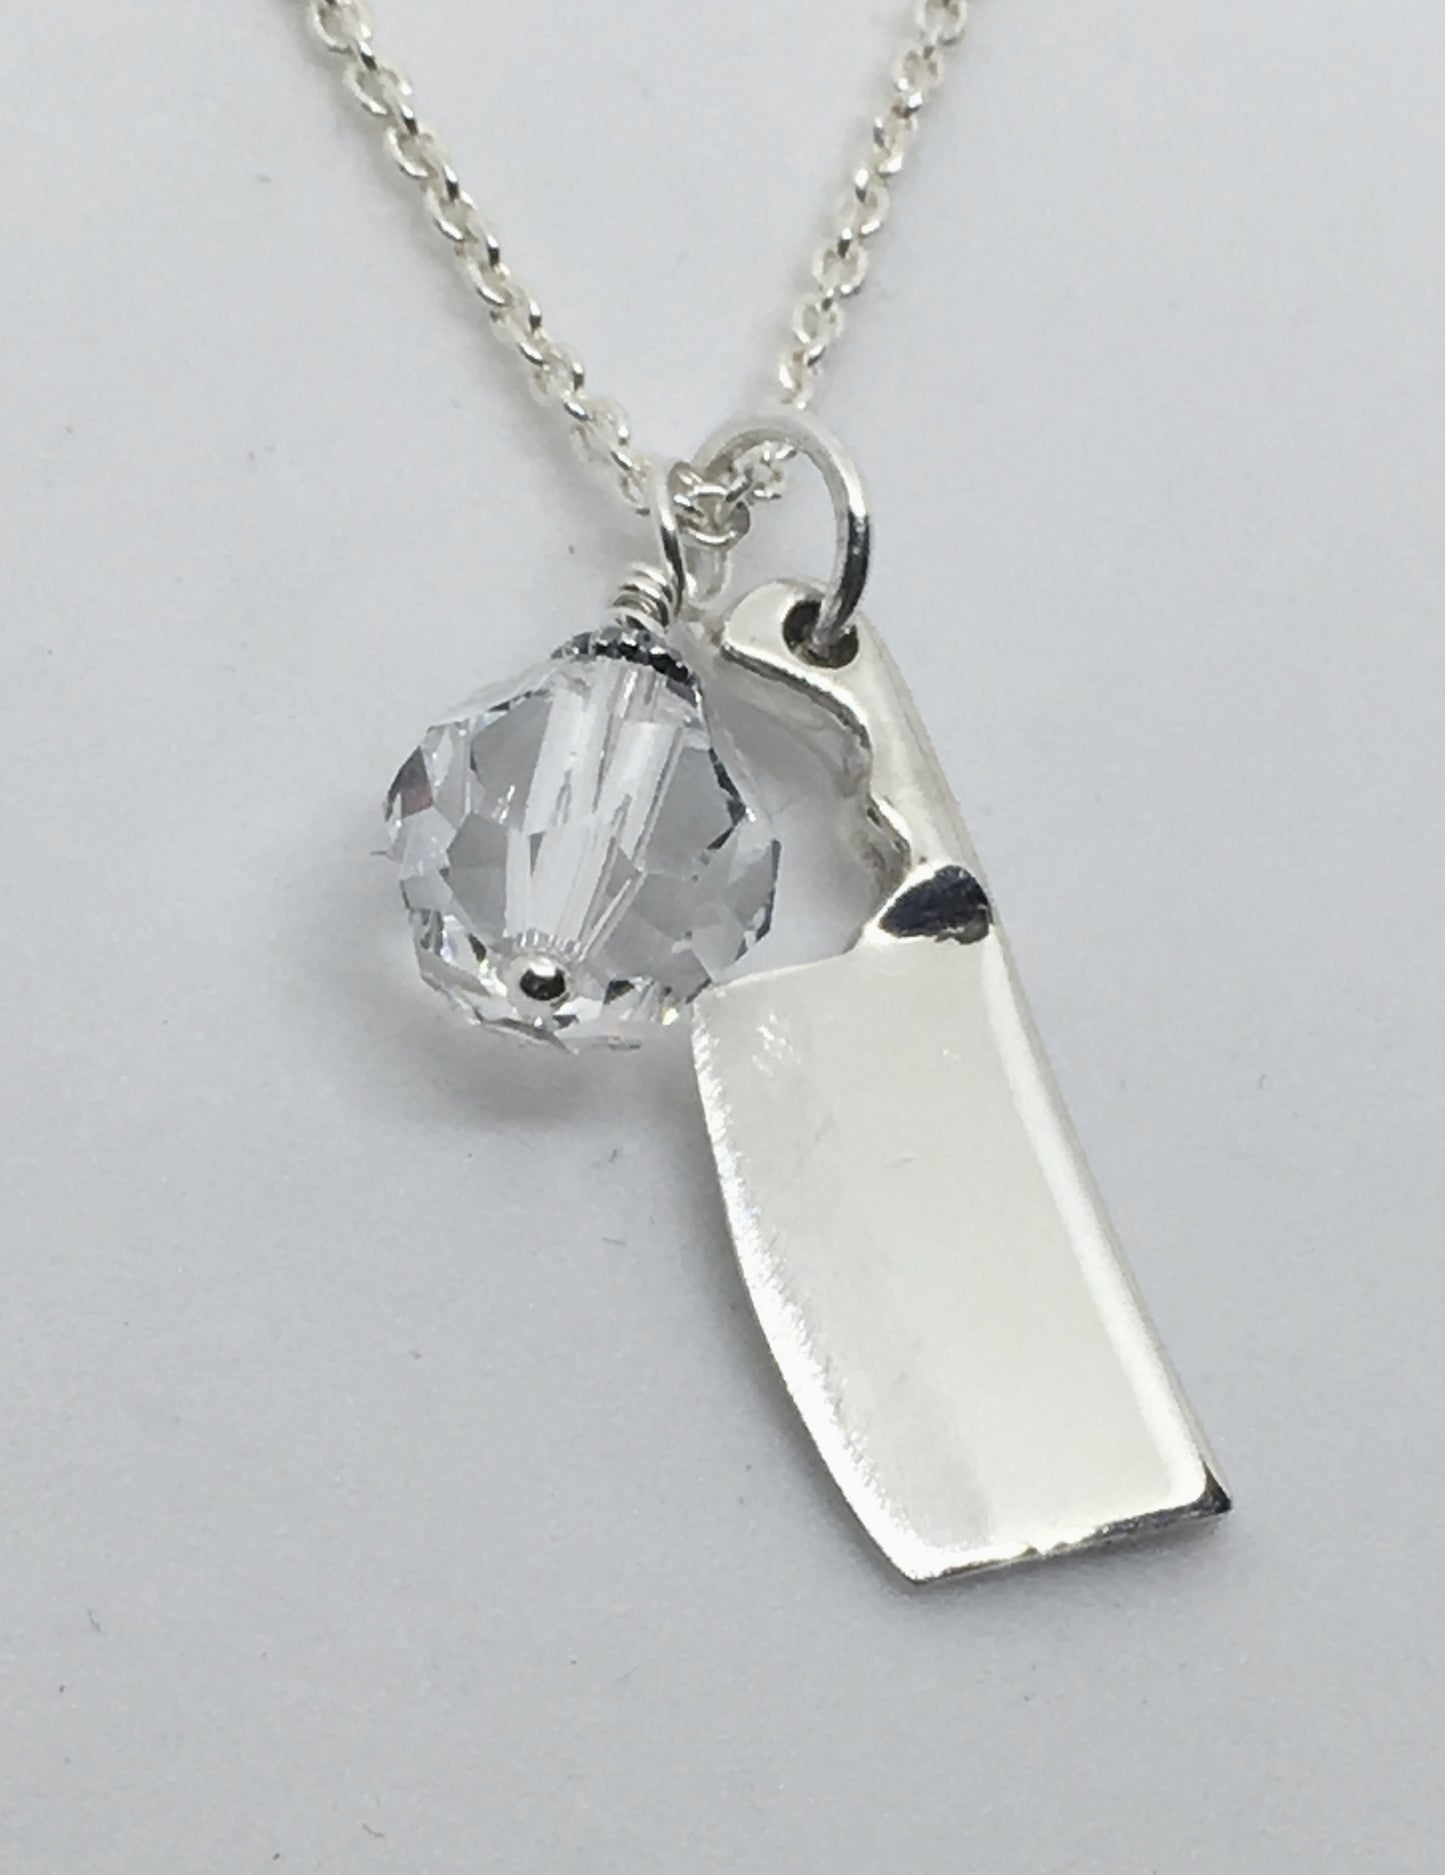 Chef's Cleaver Knife Pendant Necklace with Clear Swarovski Crystal Charm